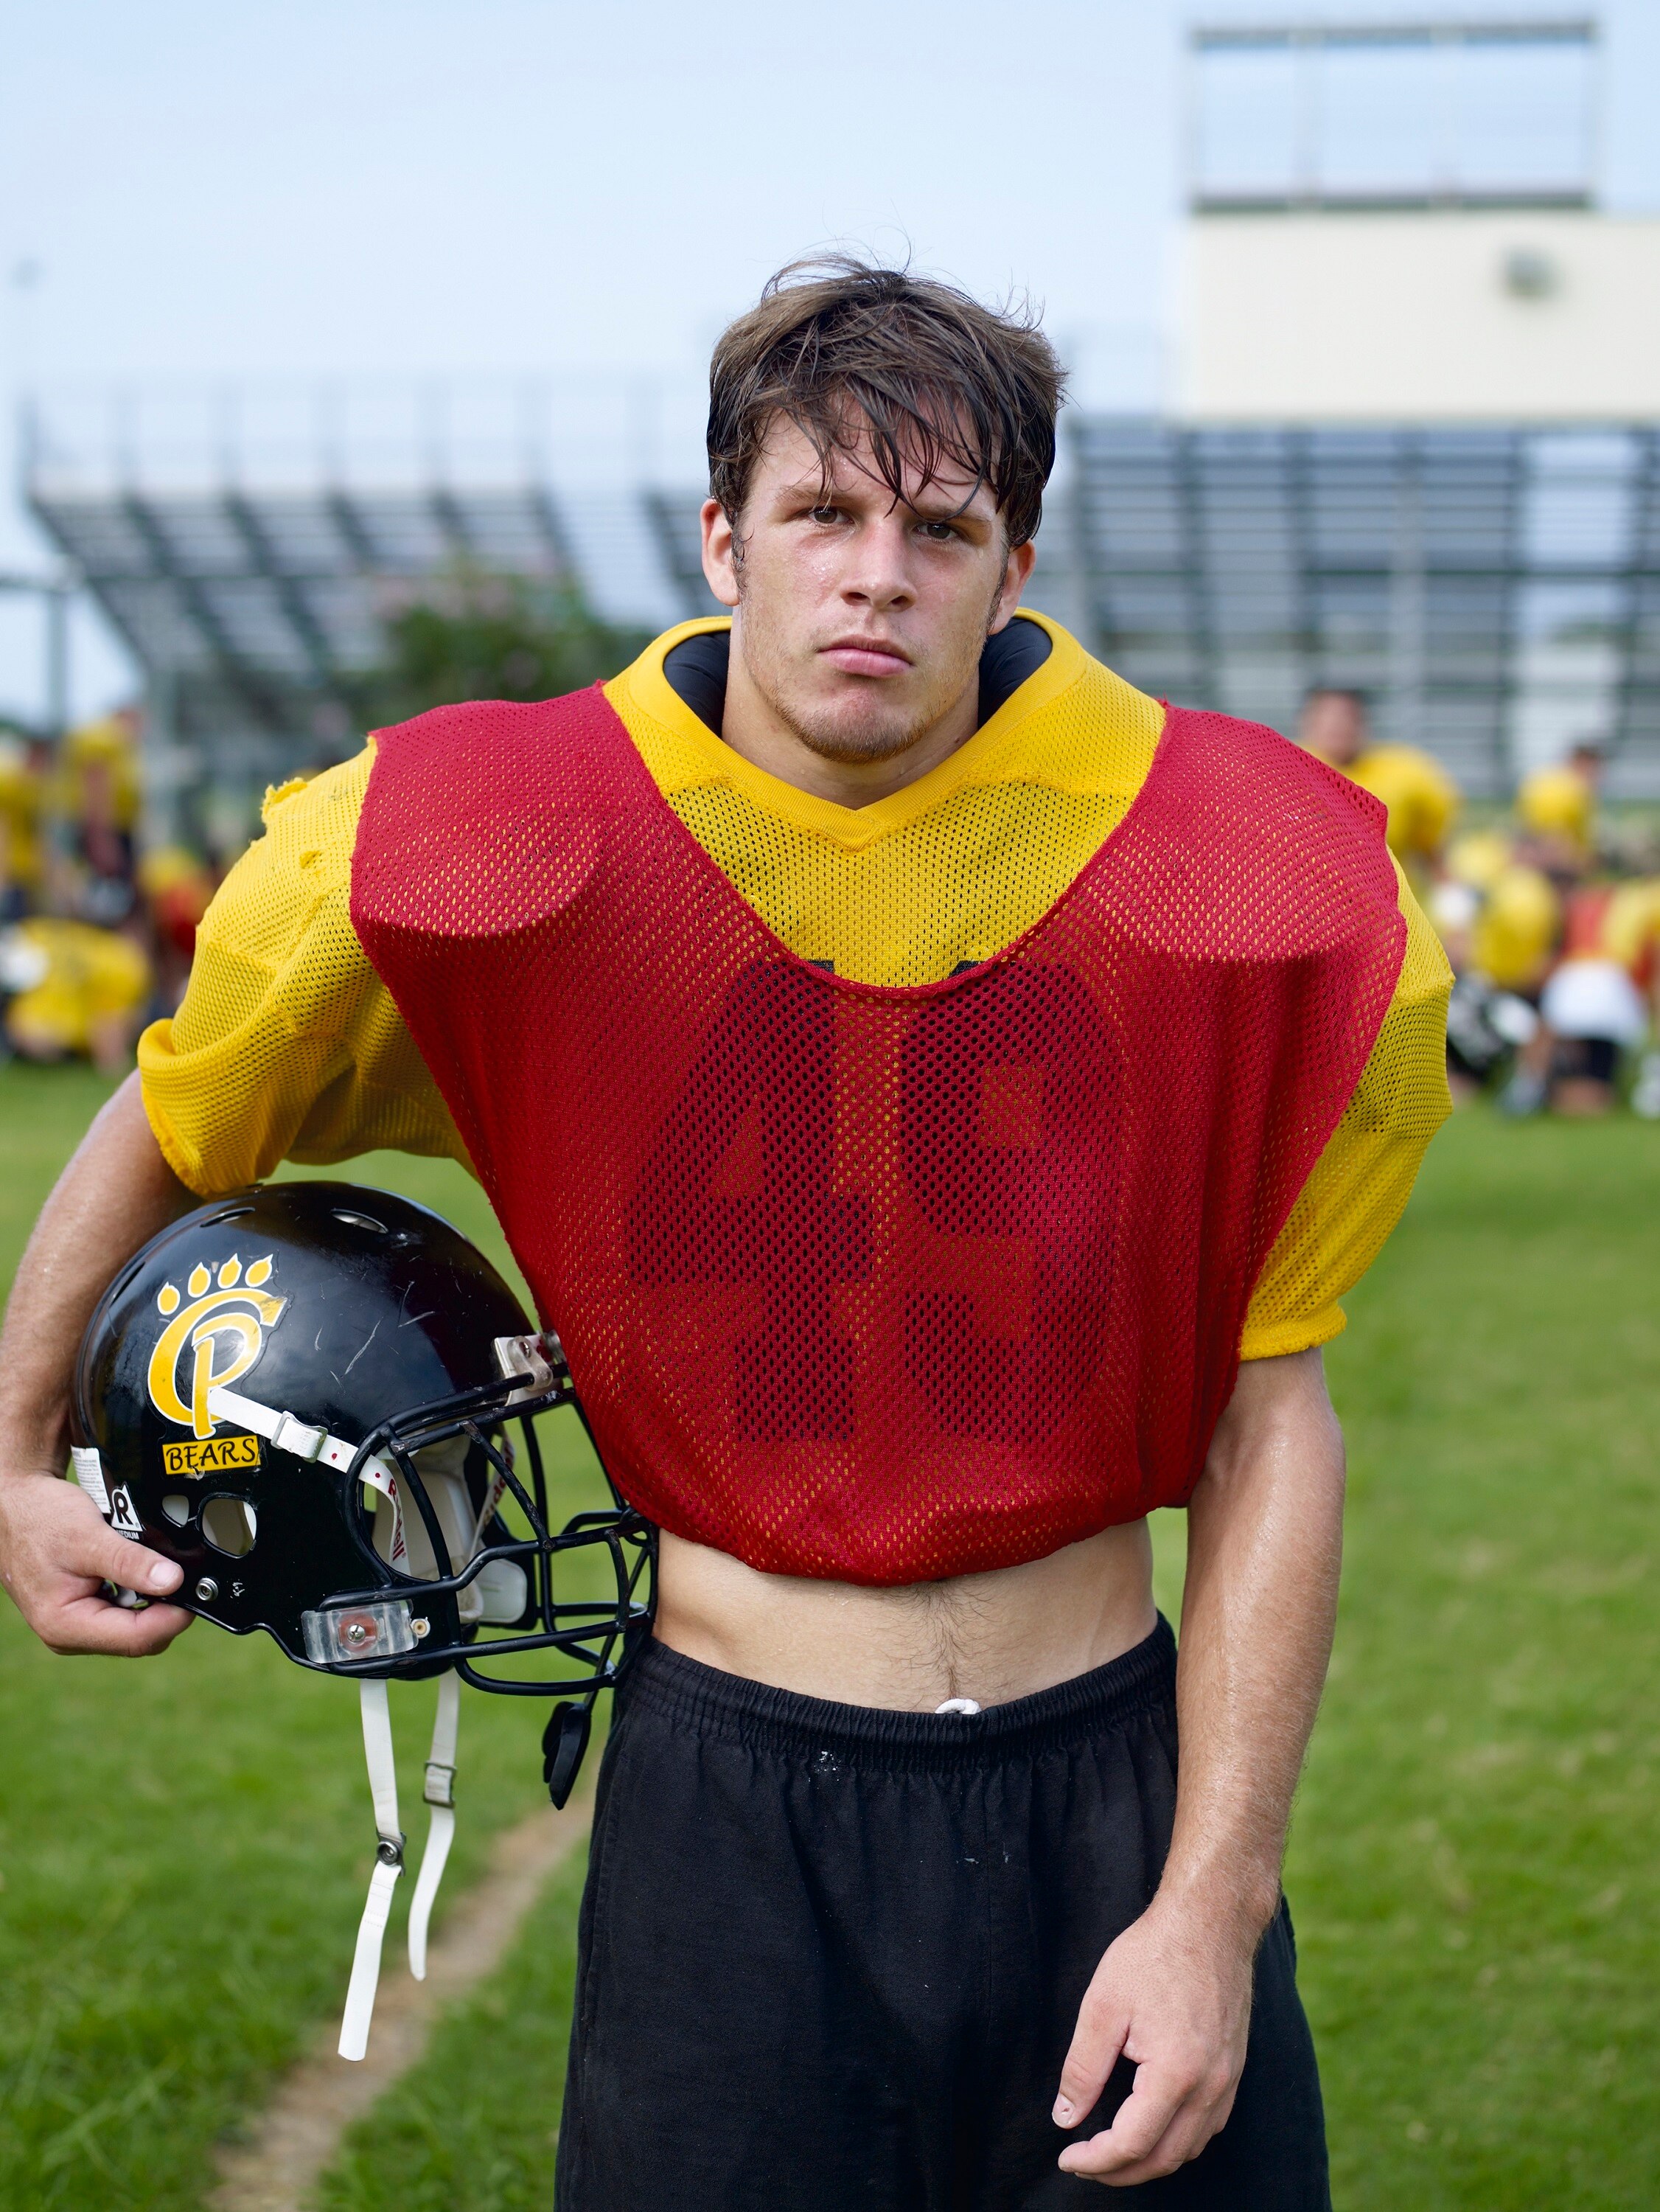 A young white man wears a red and yellow grid iron uniform, holding a black helmet at his side